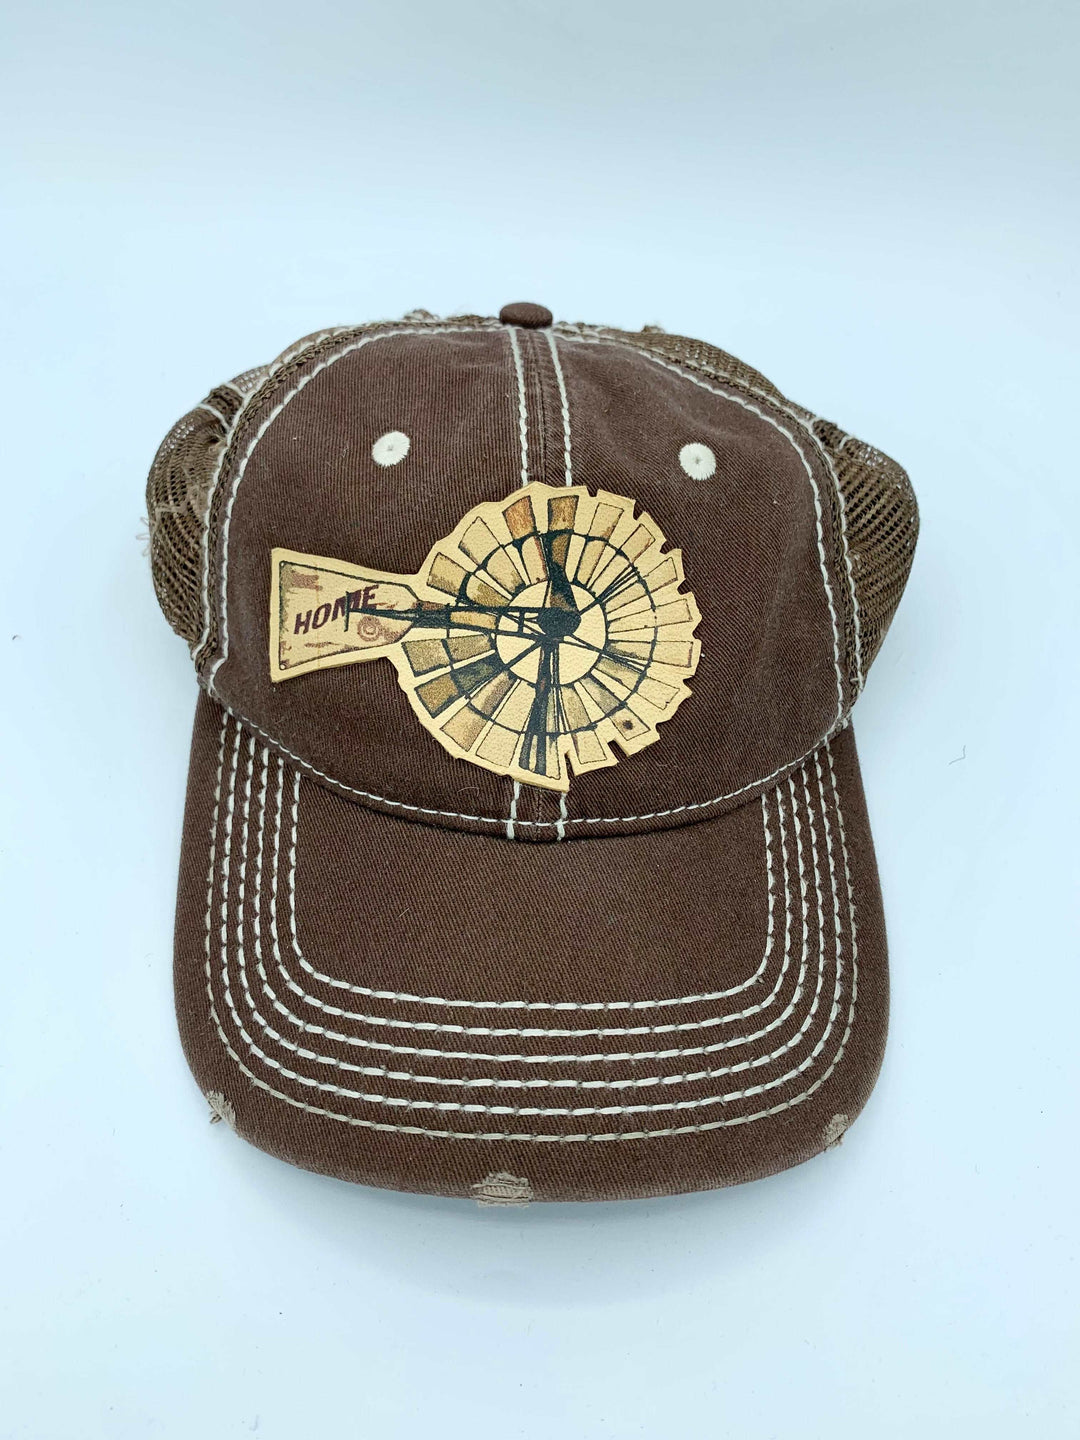 Home Wind Mill on Leather Patch Ball Cap